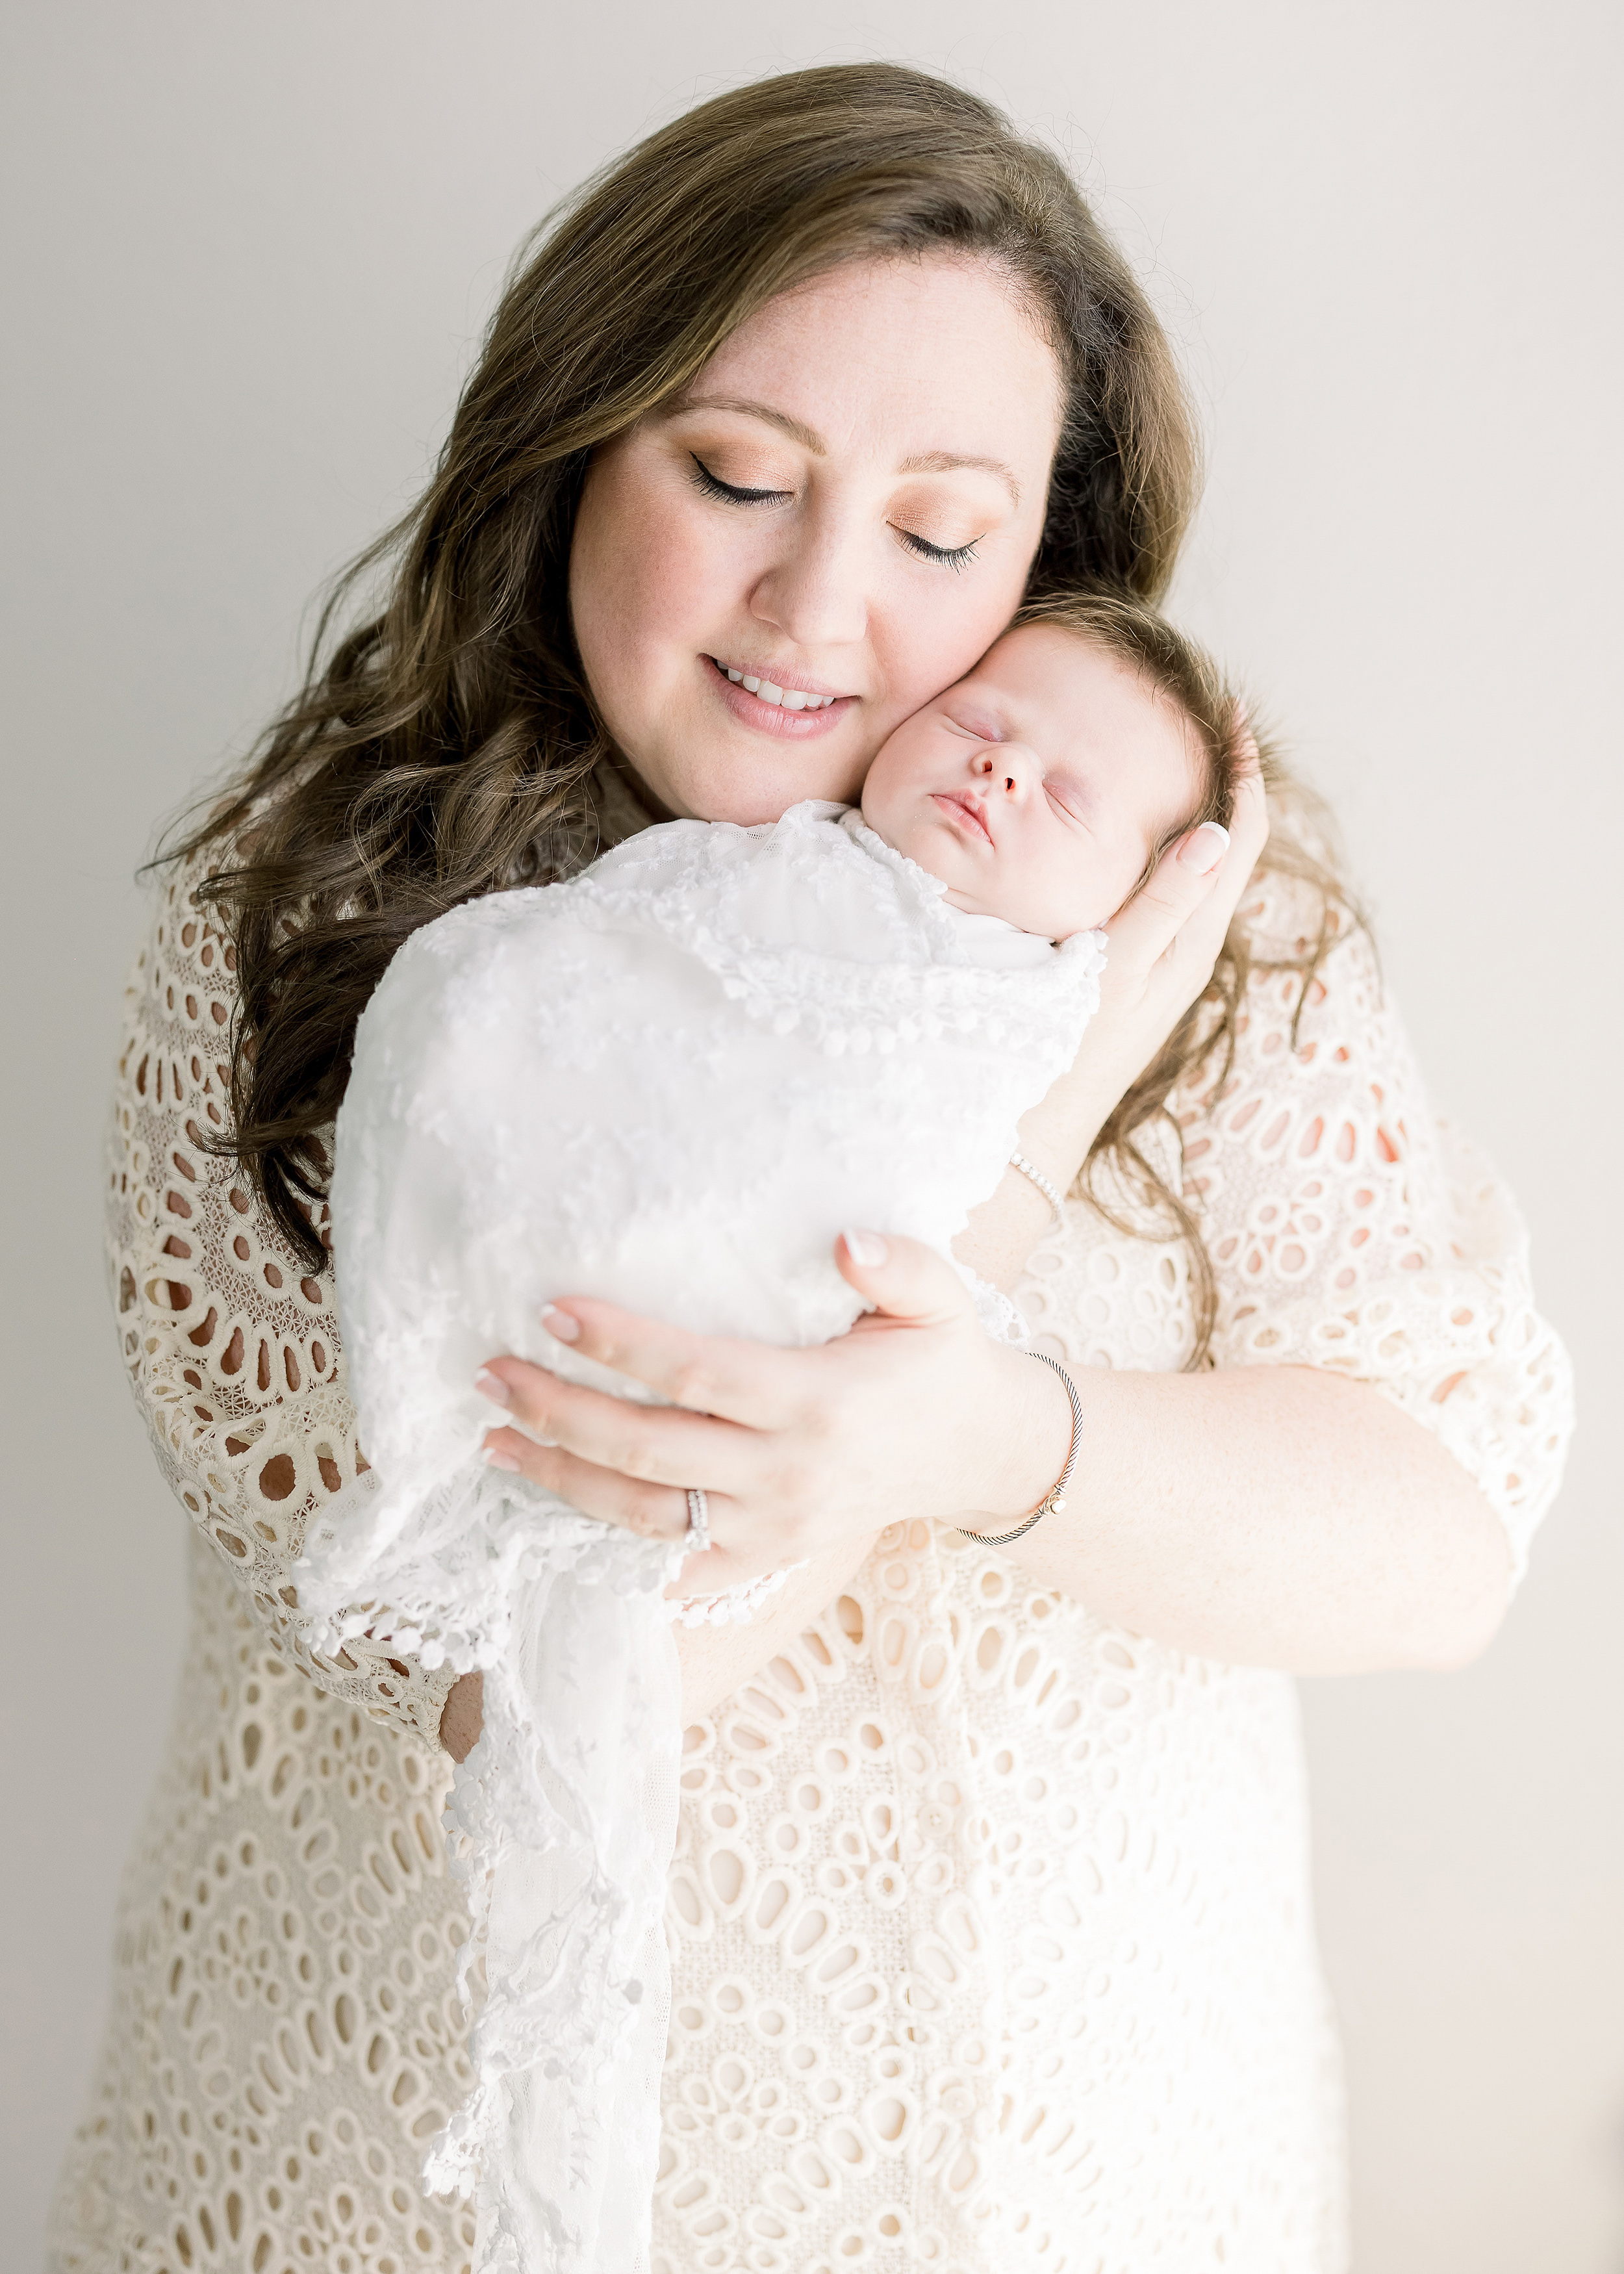 woman in cream lace dress holding newborn baby girl wrapped in white swaddle